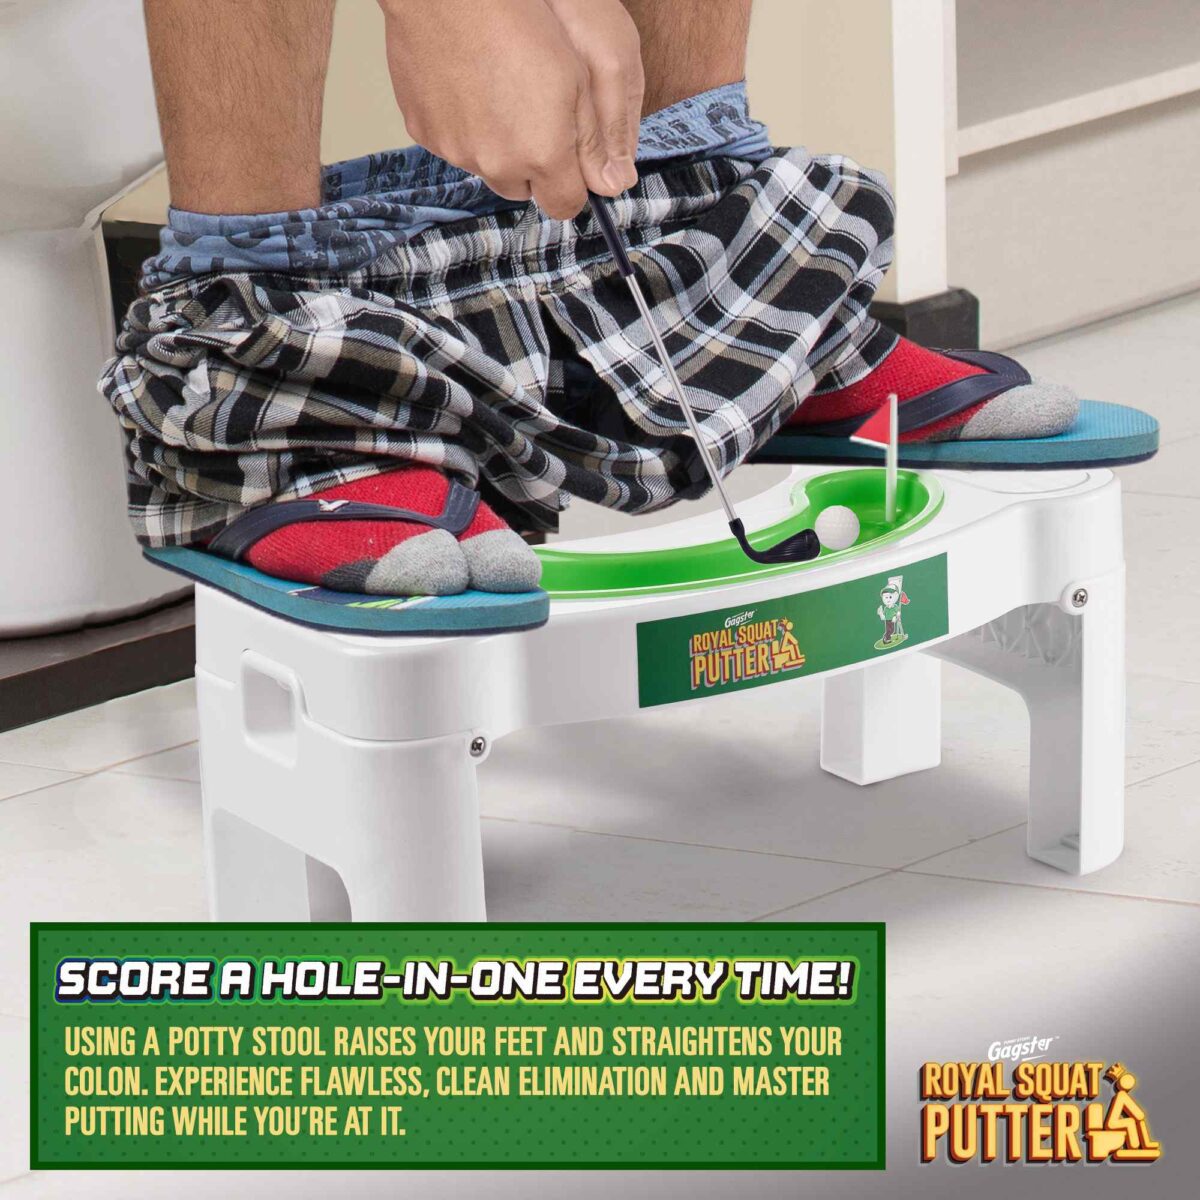 golf gifts cool gifts for golfers mini golf putter potty putter potty putter toilet golf game